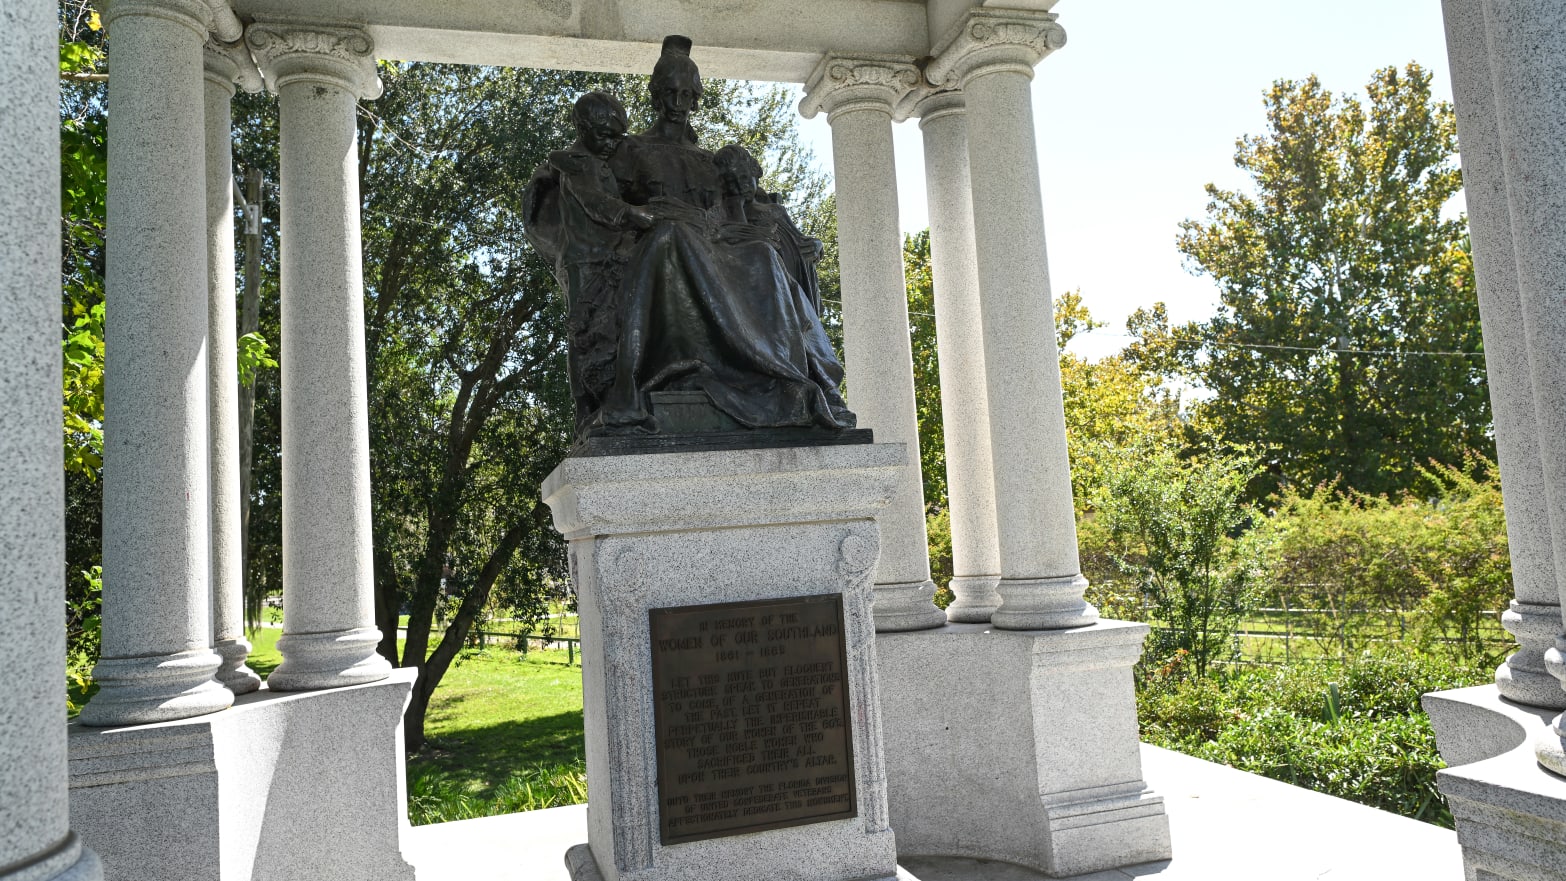 A statue to commemorate women of the confederacy is displayed at Springfield Park.